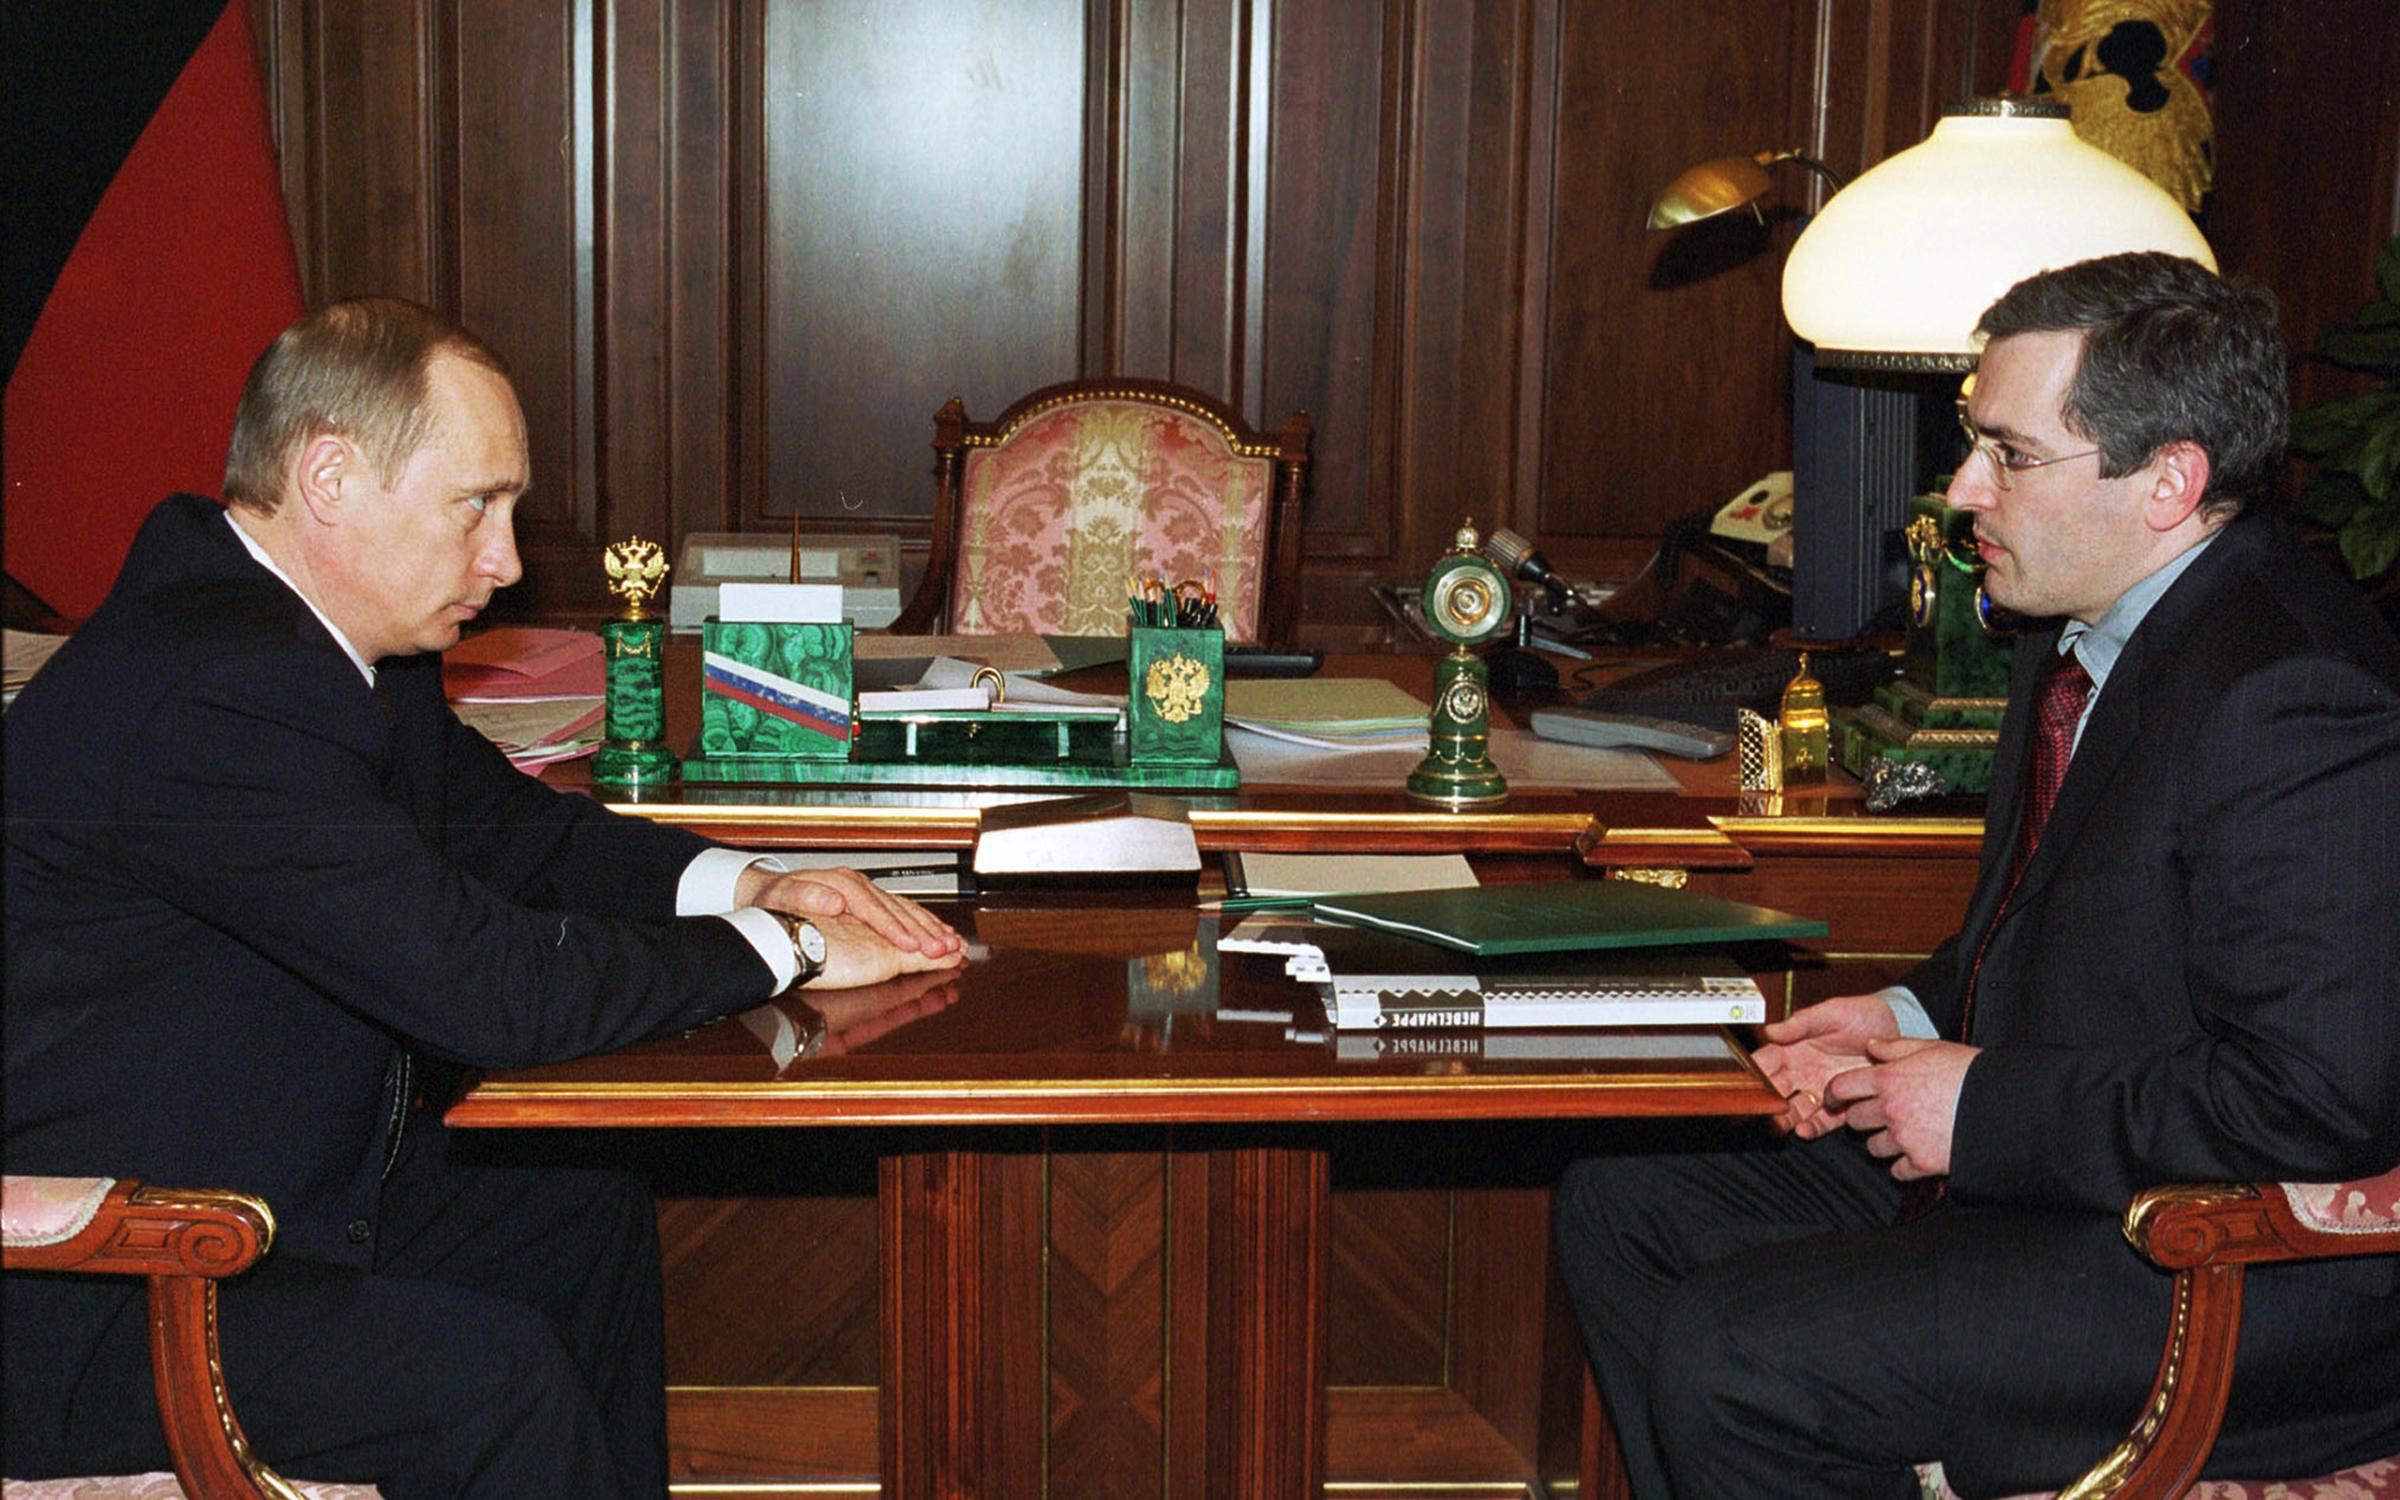 President Vladimir Putin, right, during the meeting with Mikhail Khodorkovsky, board chairman of the Yukos oil company, in the Kremlin in Moscow, Russia, March 14, 2002.